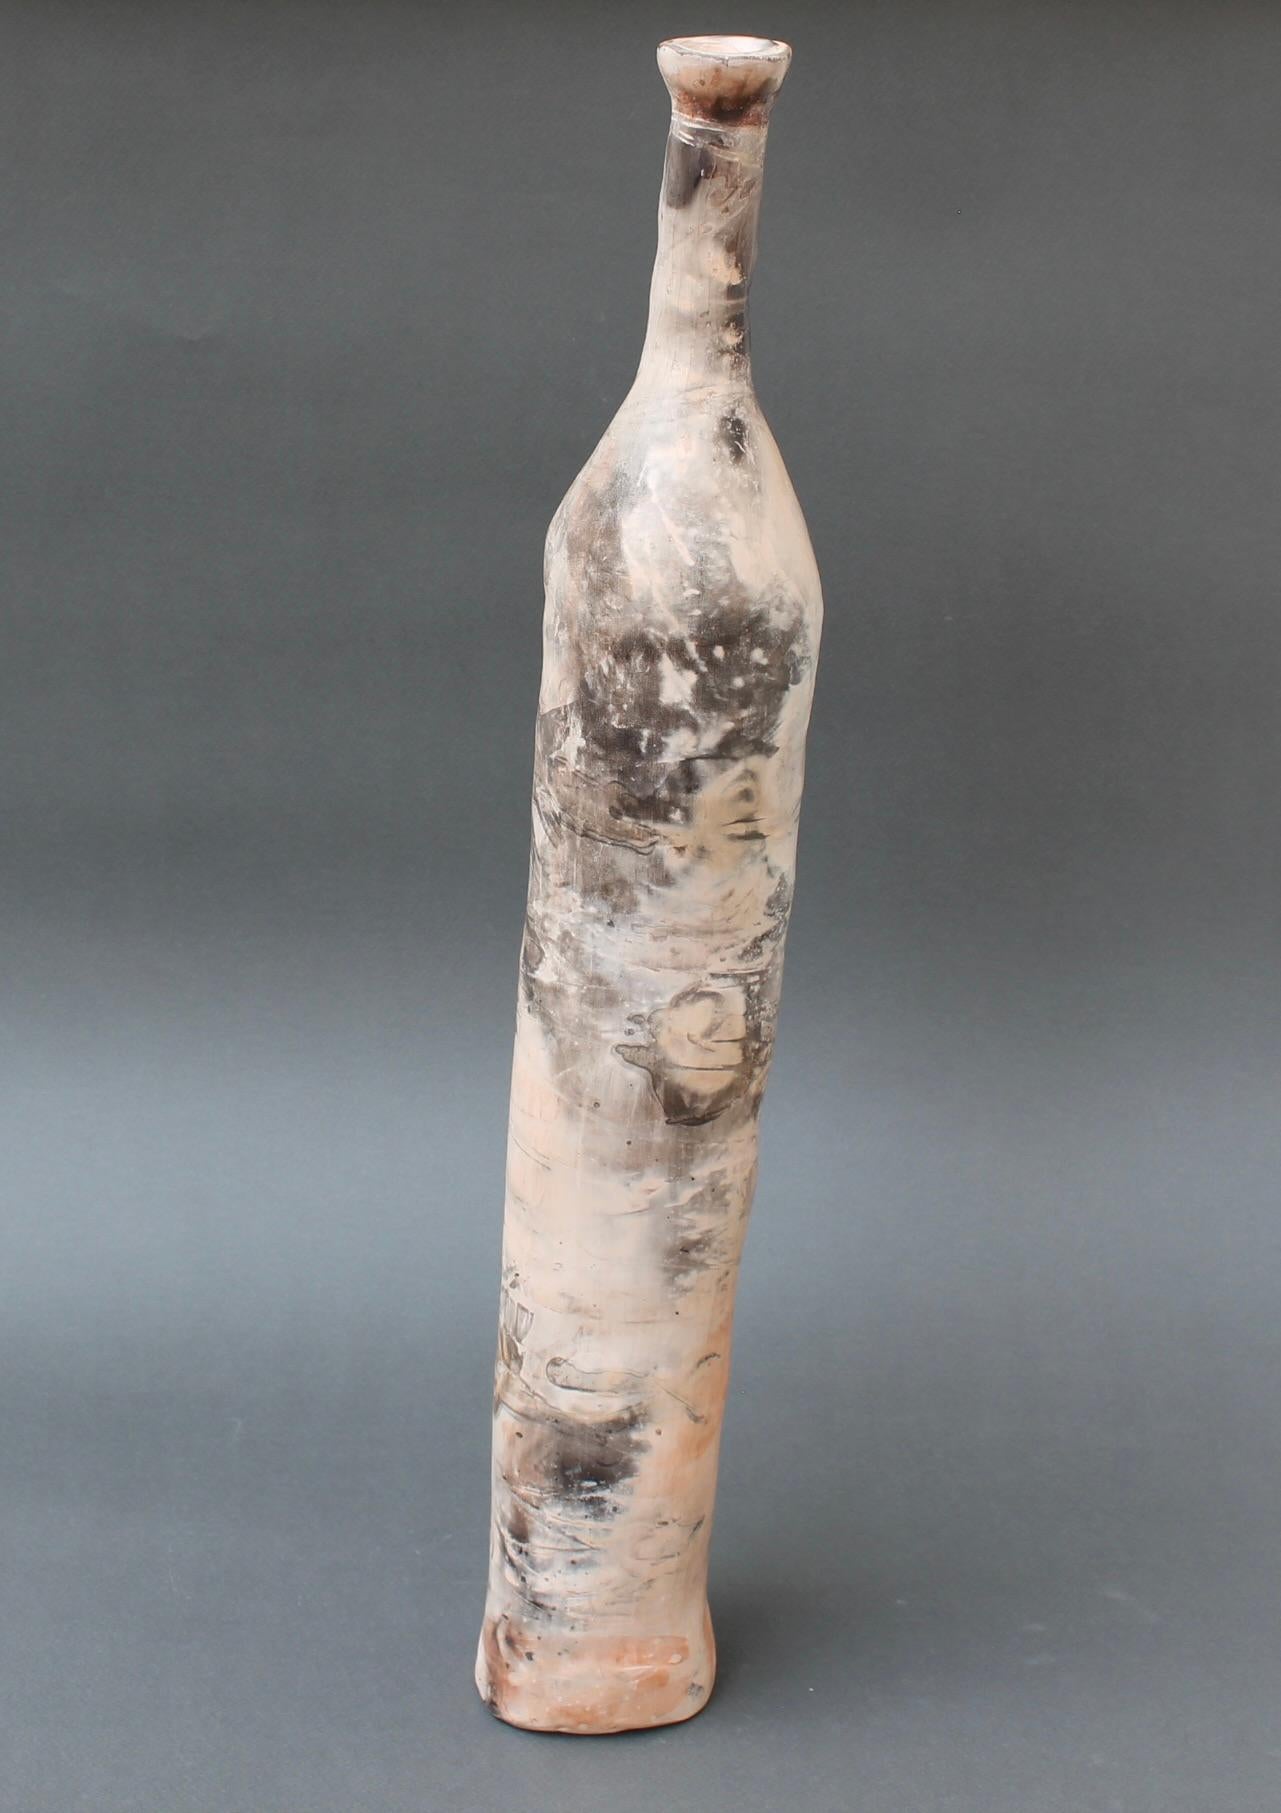 20th Century Vintage French Decorative Ceramic Elongated Bottle (20th C) For Sale